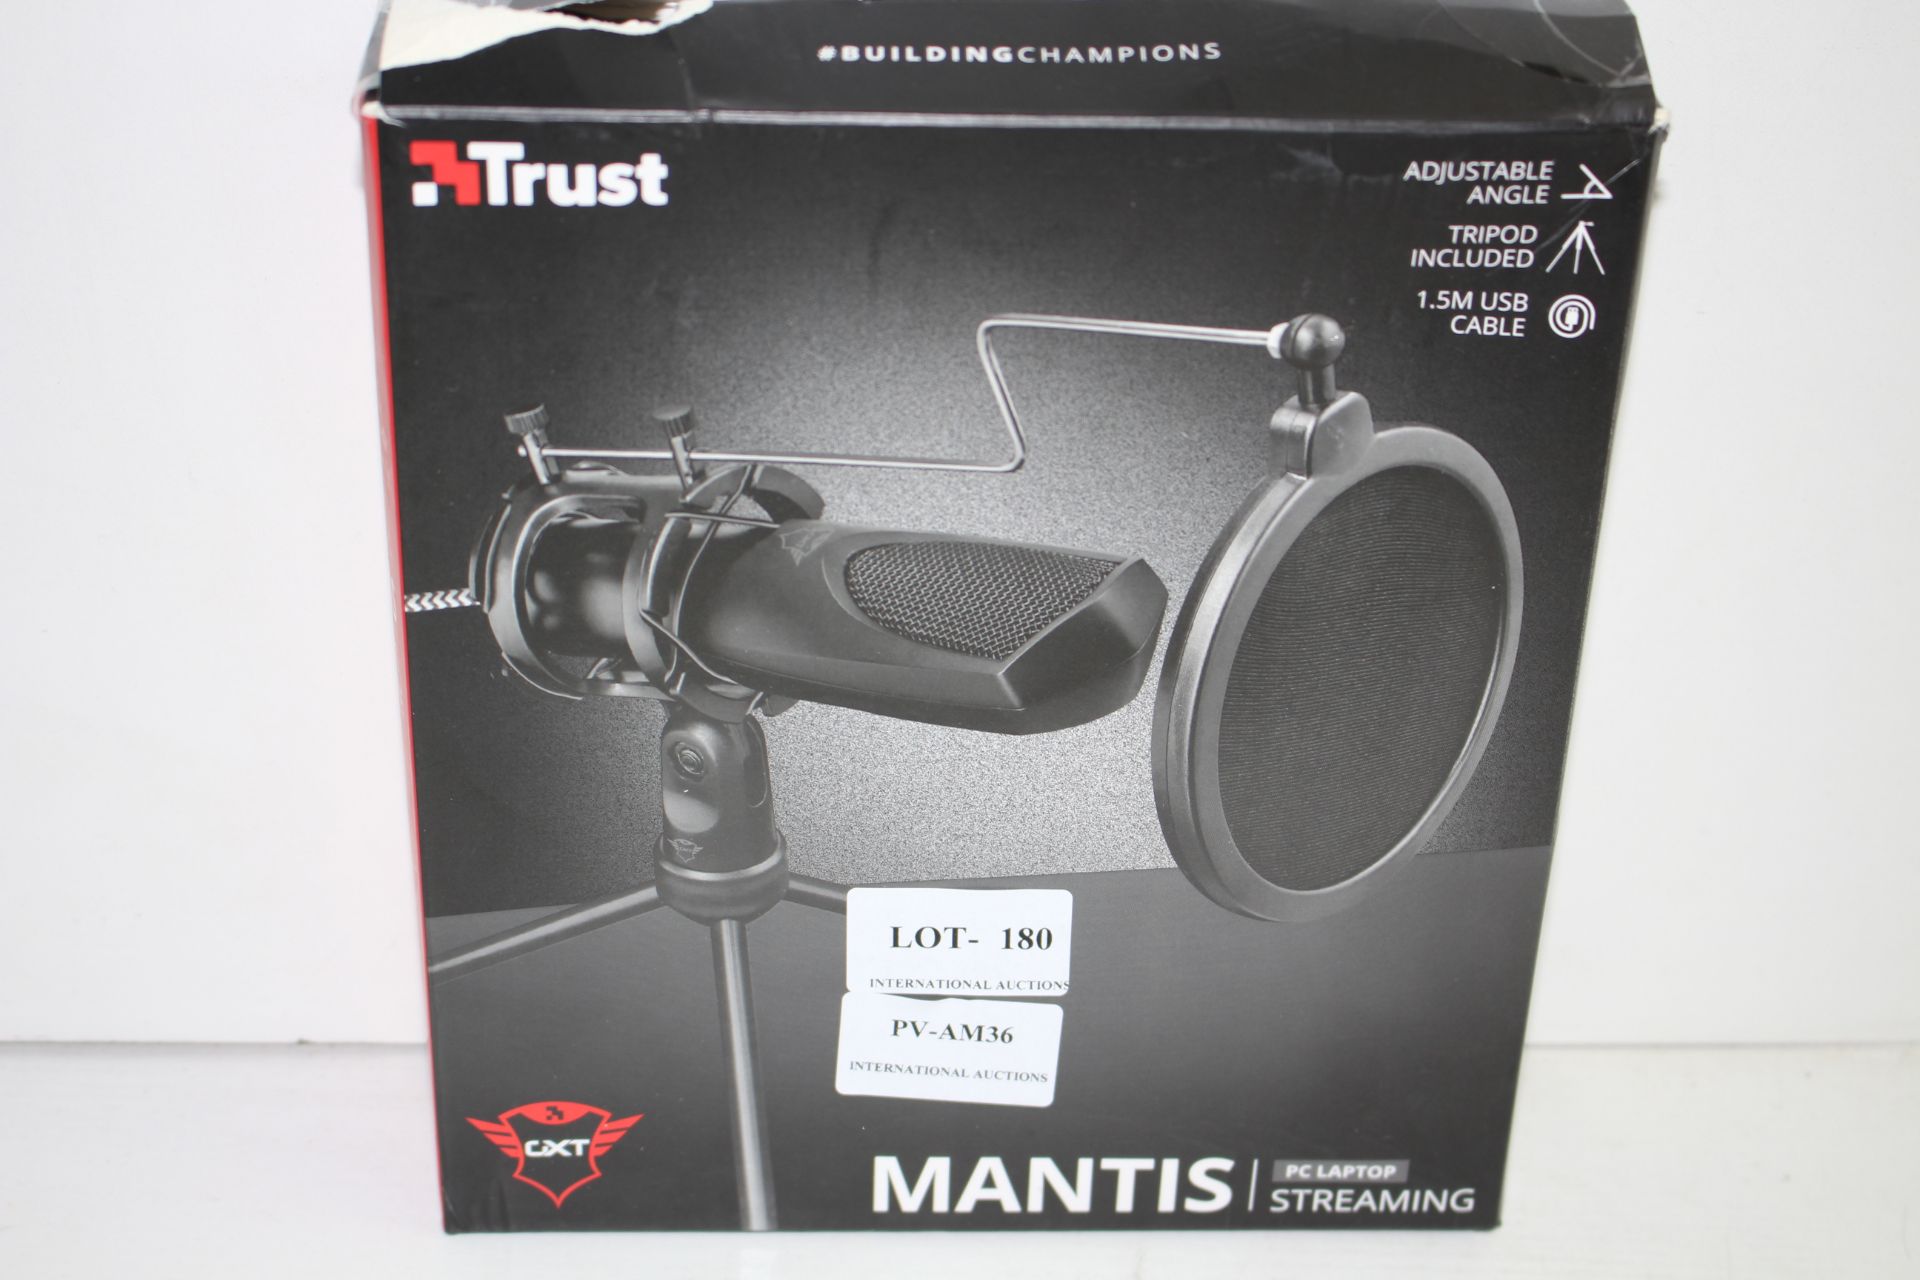 BOXED TRUST MANTIS PC LAPTOP STREAMING MICROPHONE MODEL: GXT 232 RRP £19.99Condition ReportAppraisal